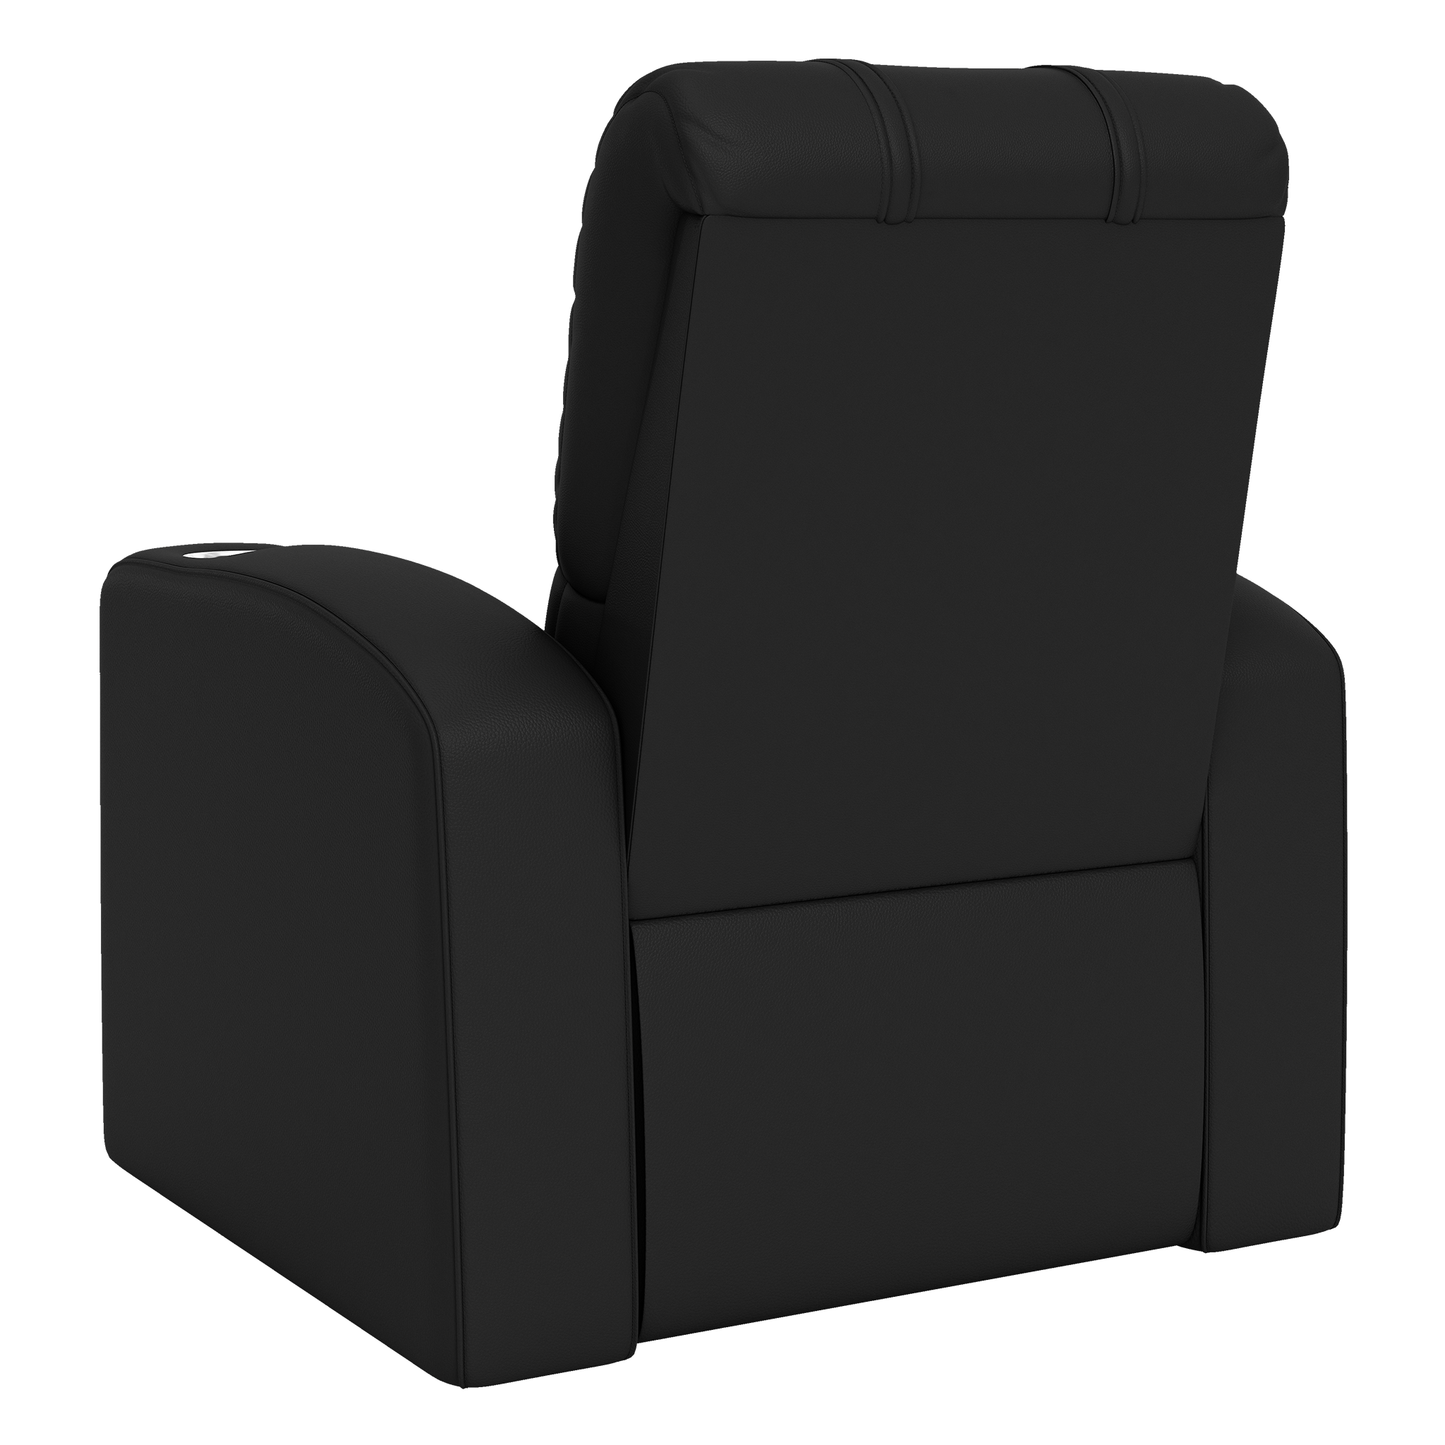 Relax Home Theater Recliner with Knights of Degen Primary Logo